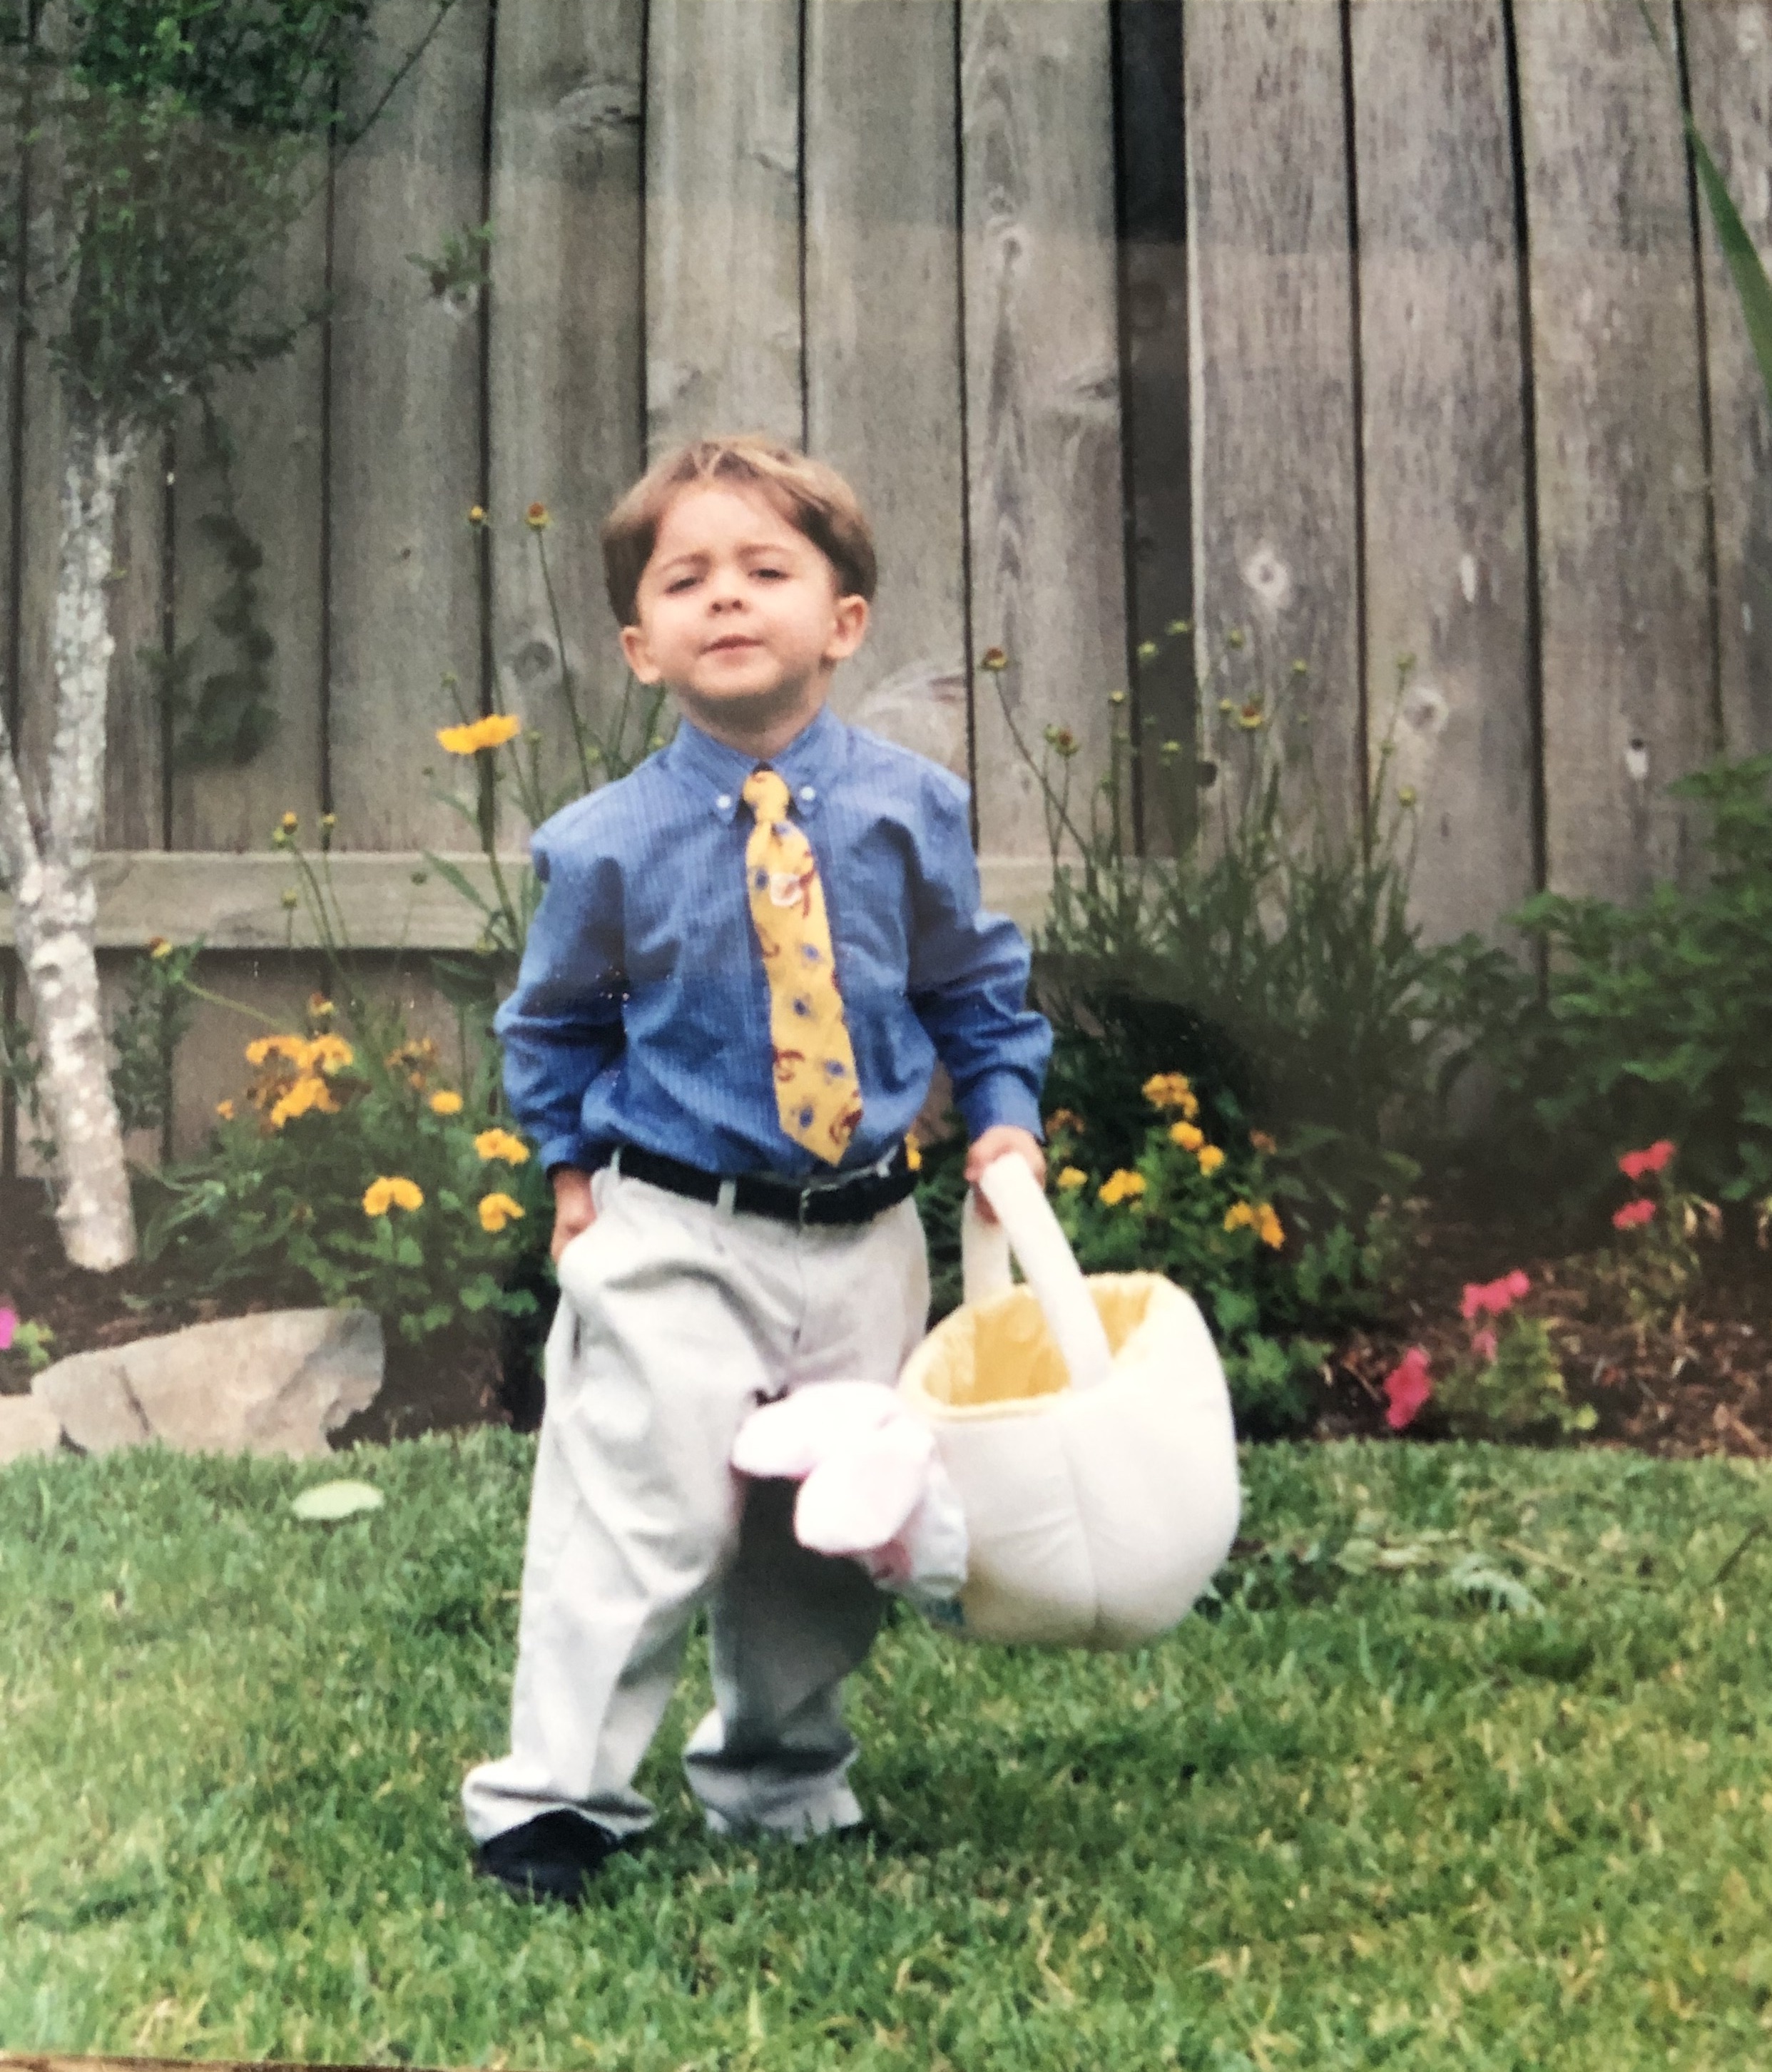 me as a child on Easter